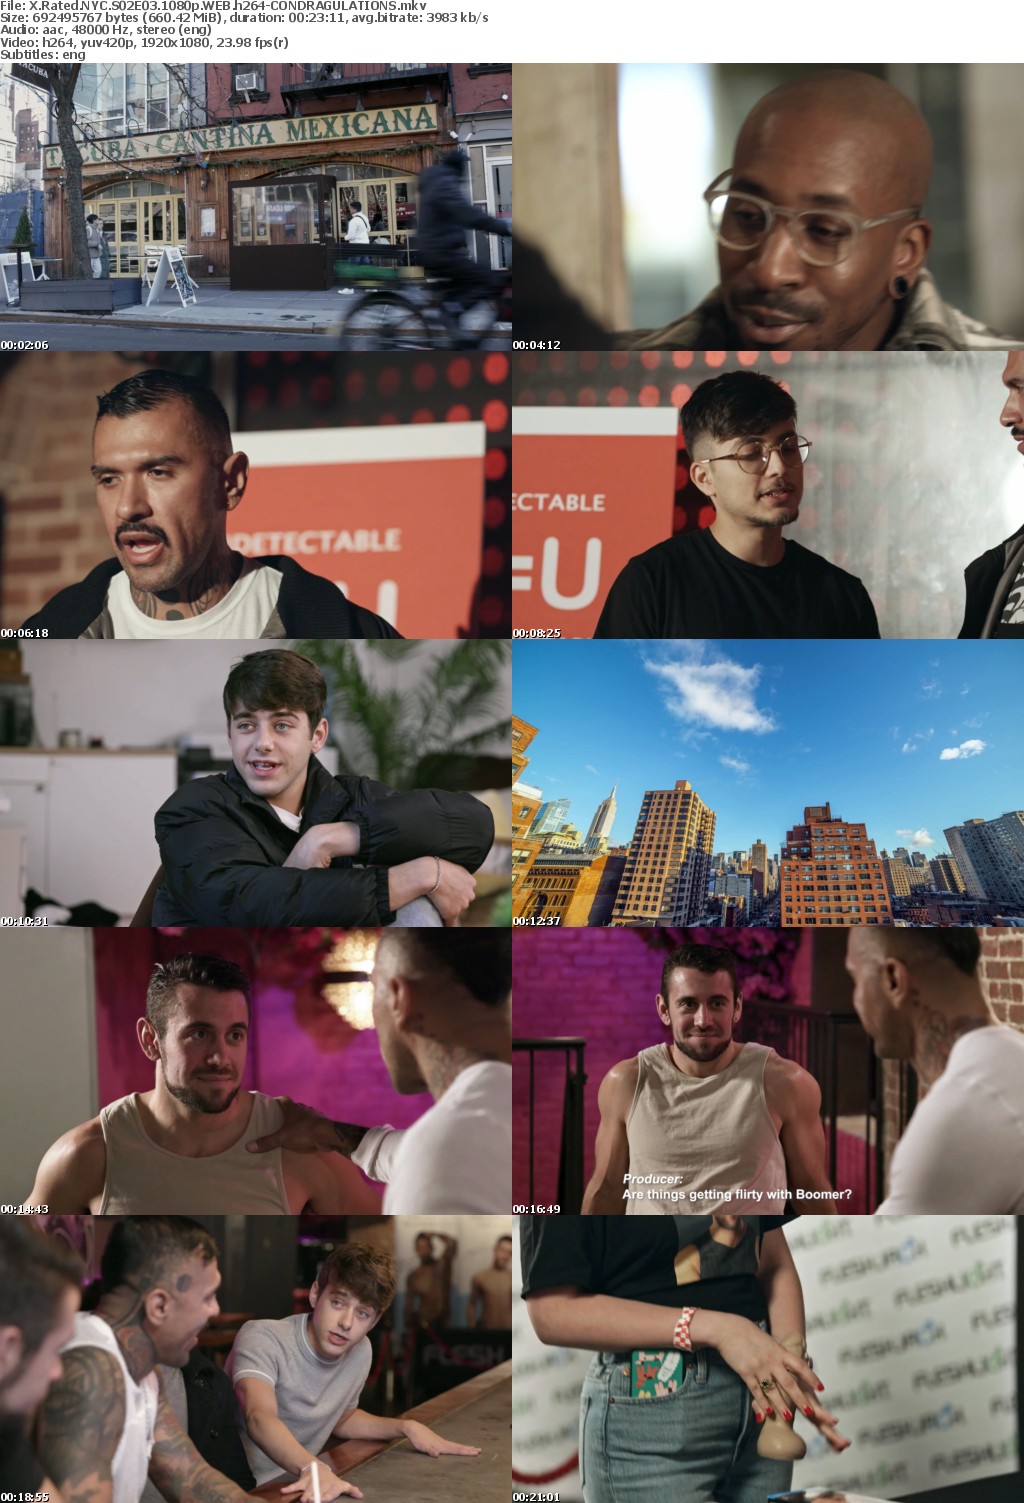 X Rated NYC S02 COMPLETE 1080p WEB h264-CONDRAGULATIONS